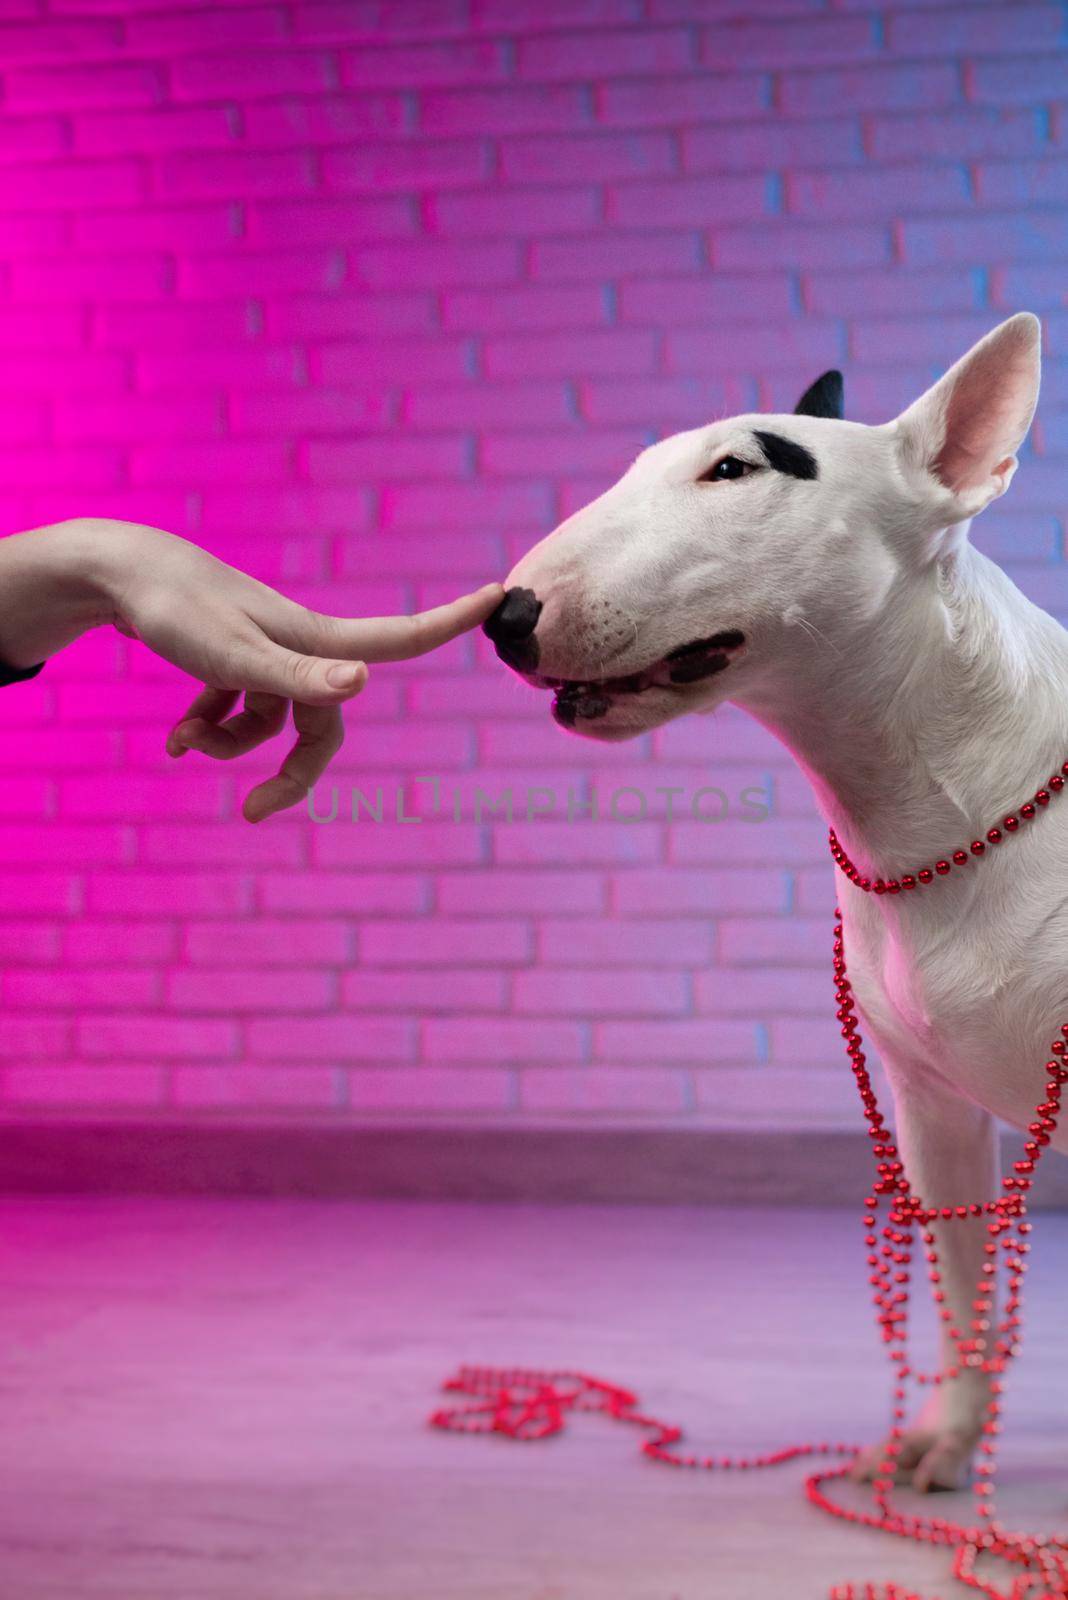 a human hand touches the nose of a white bull terrier dog against a brick wall background in neon pink and blue tones by Rotozey